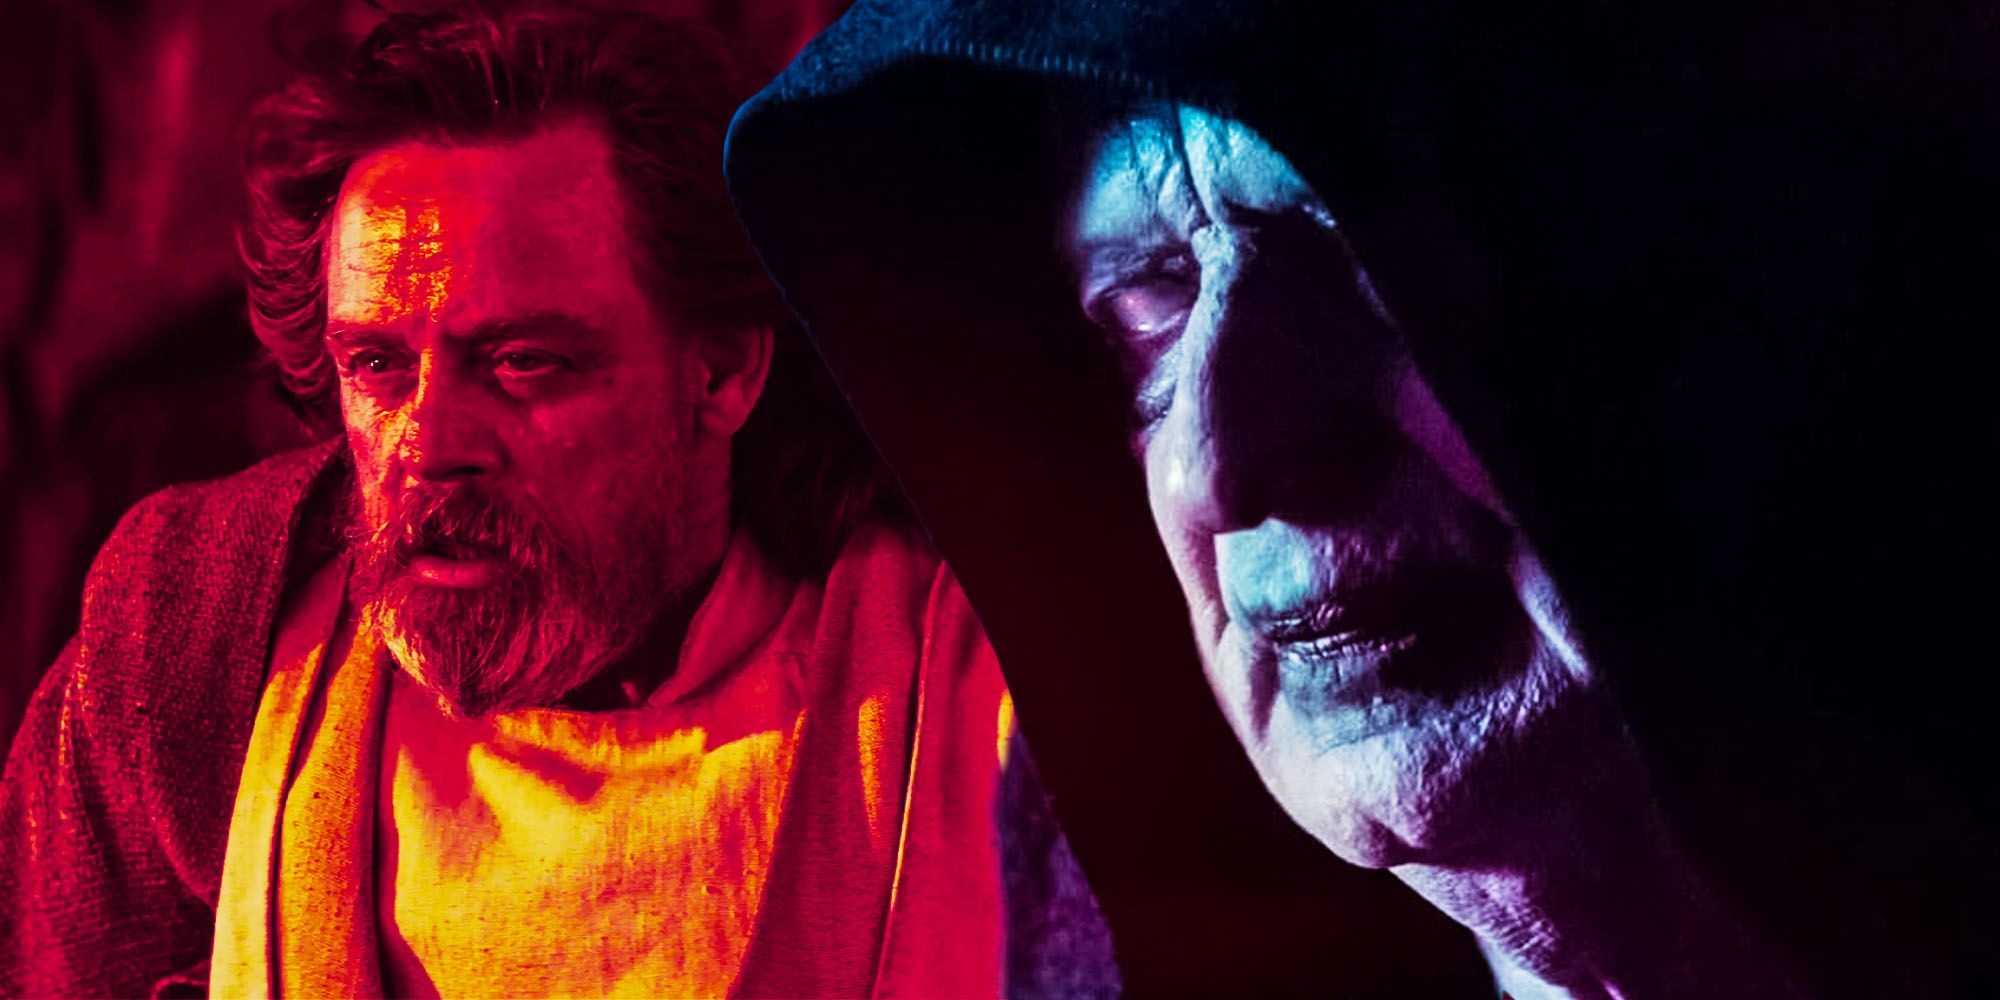 Palpatine thought of Lukes death in star wars the last jedi